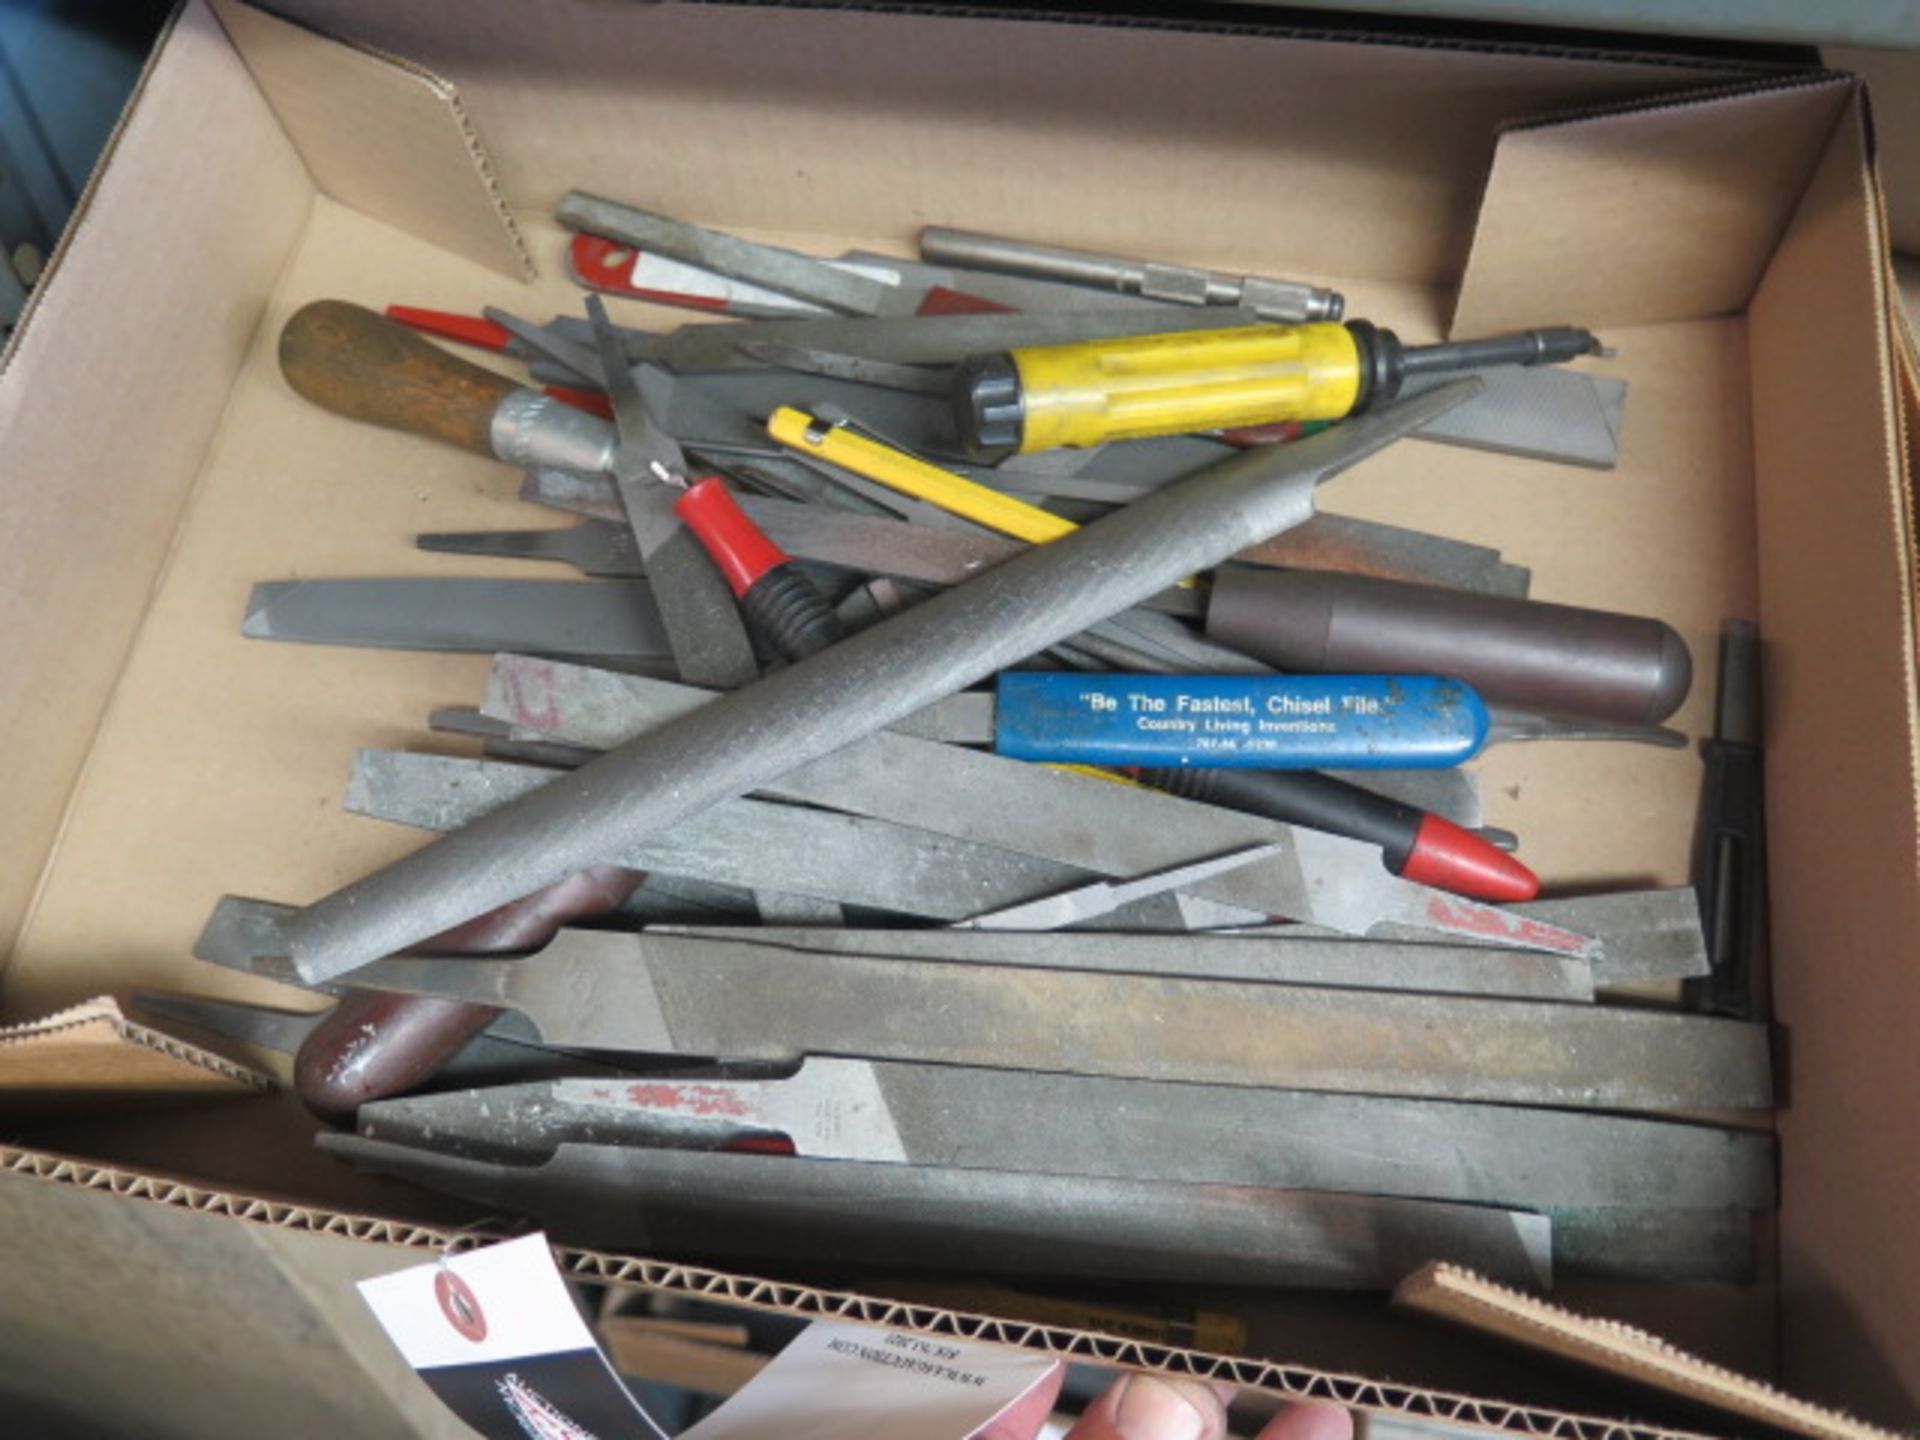 Files and Deburring Tools (SOLD AS-IS - NO WARRANTY) - Image 2 of 2